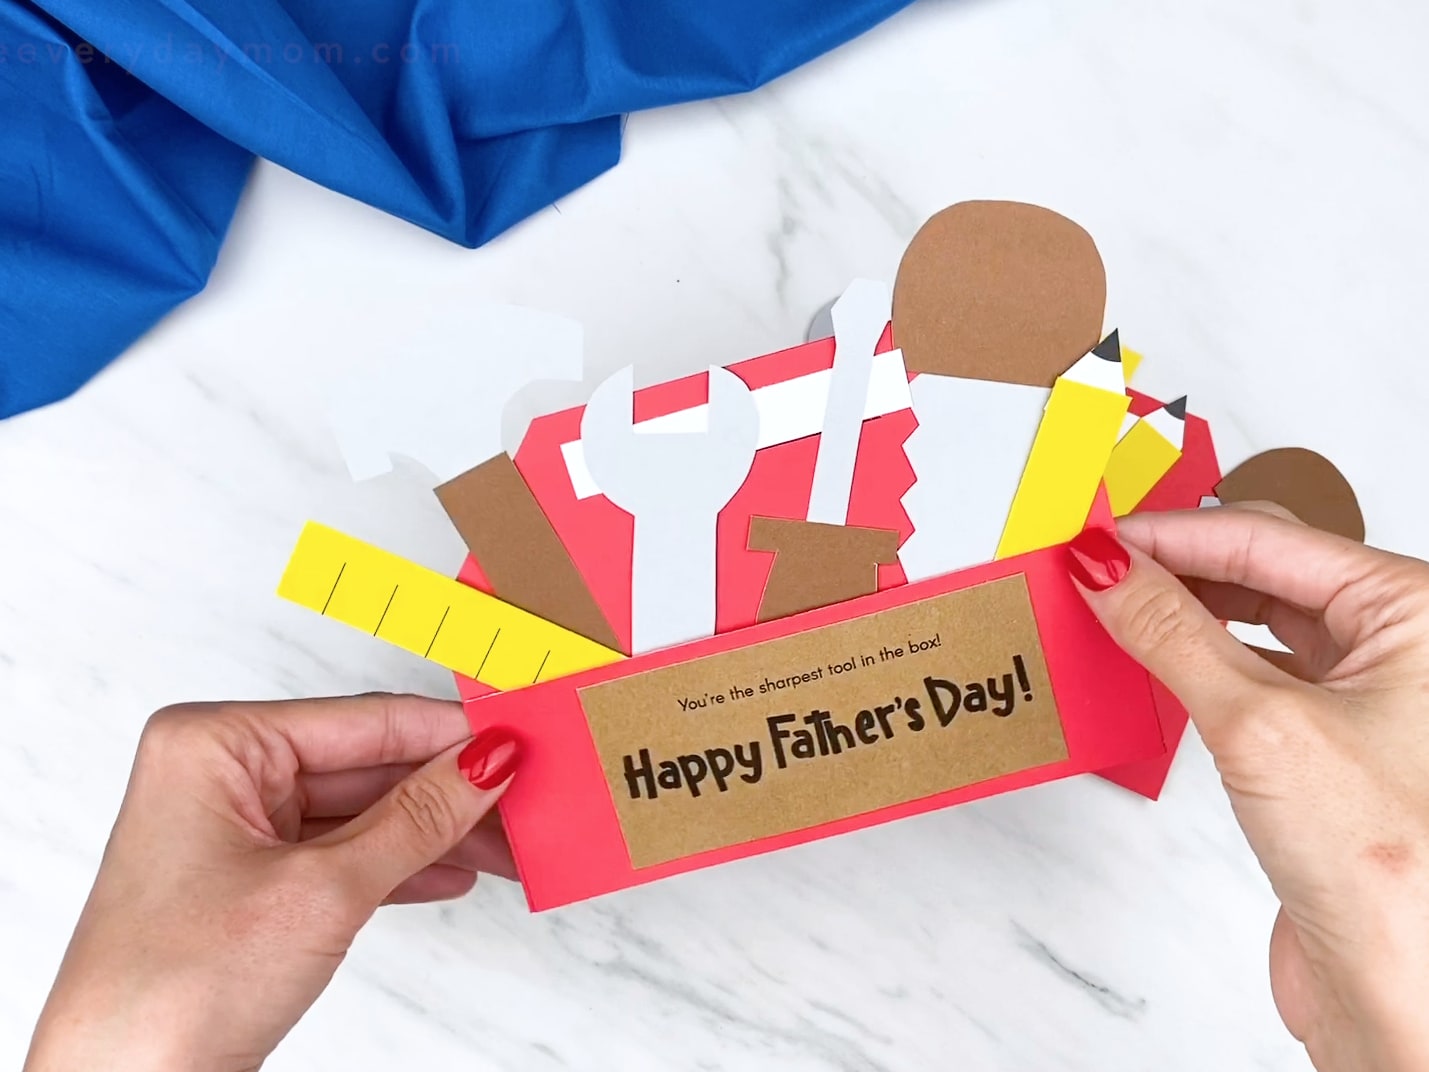 Father's Day Toolbox Craft [Free Template]